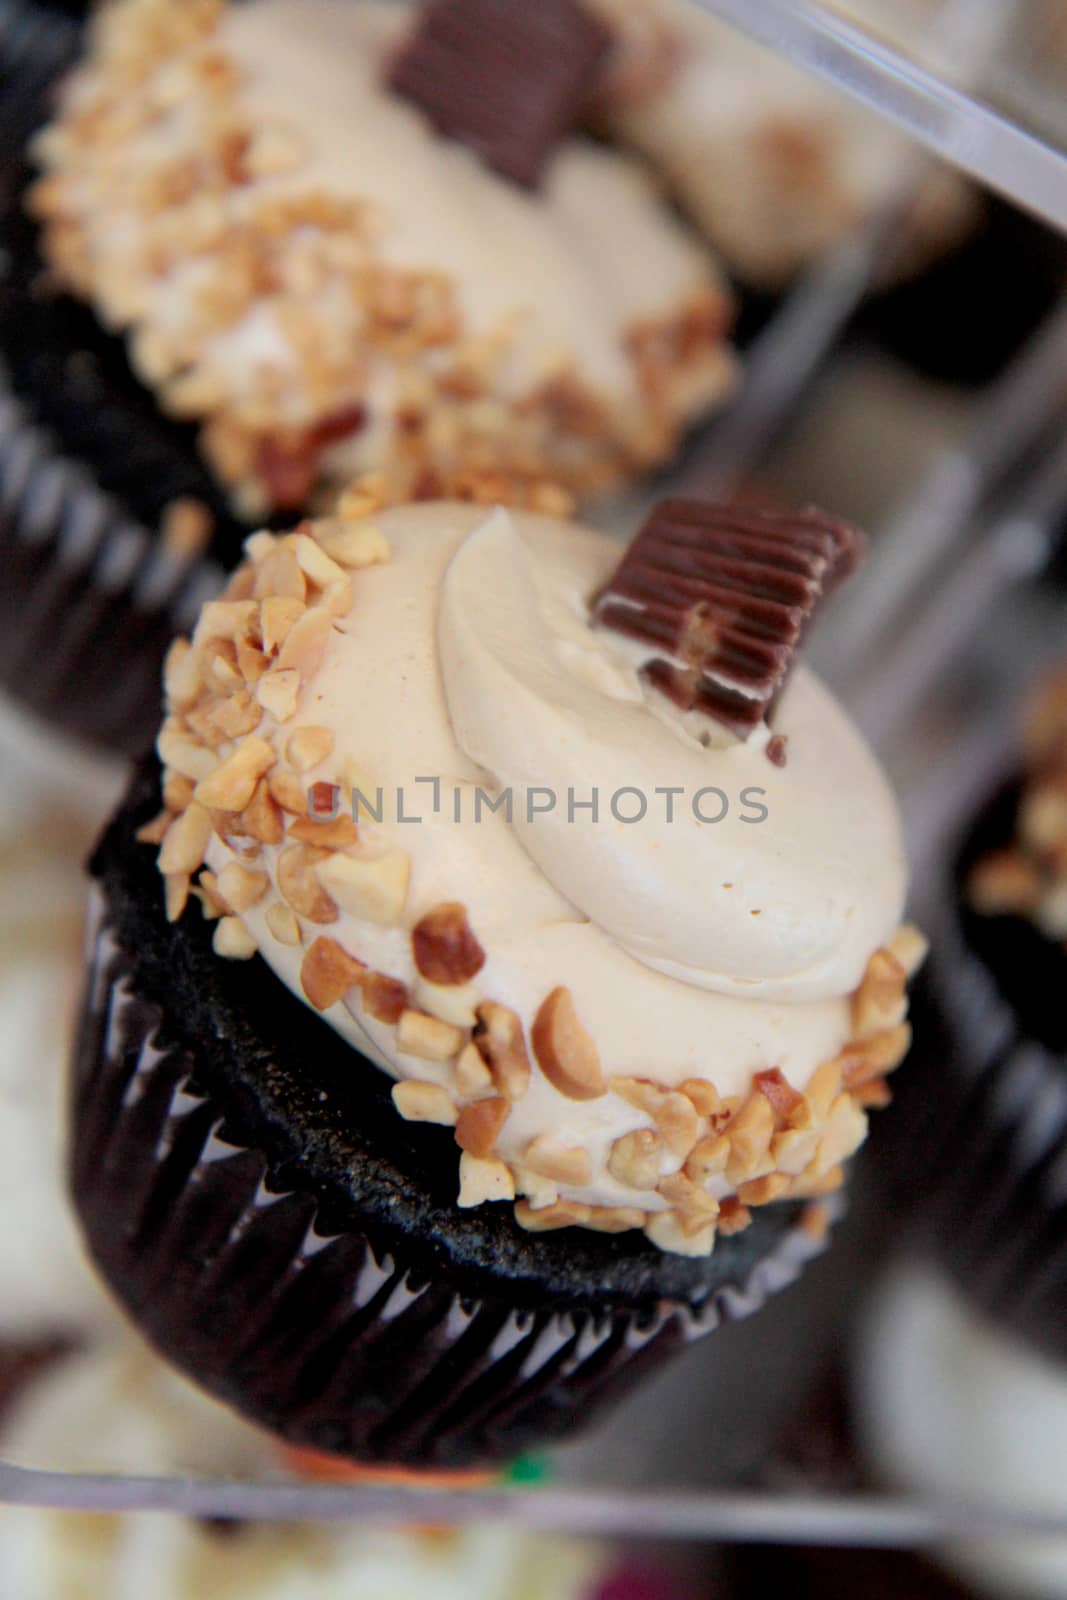 chocolate and peanut butter cupcake by ftlaudgirl